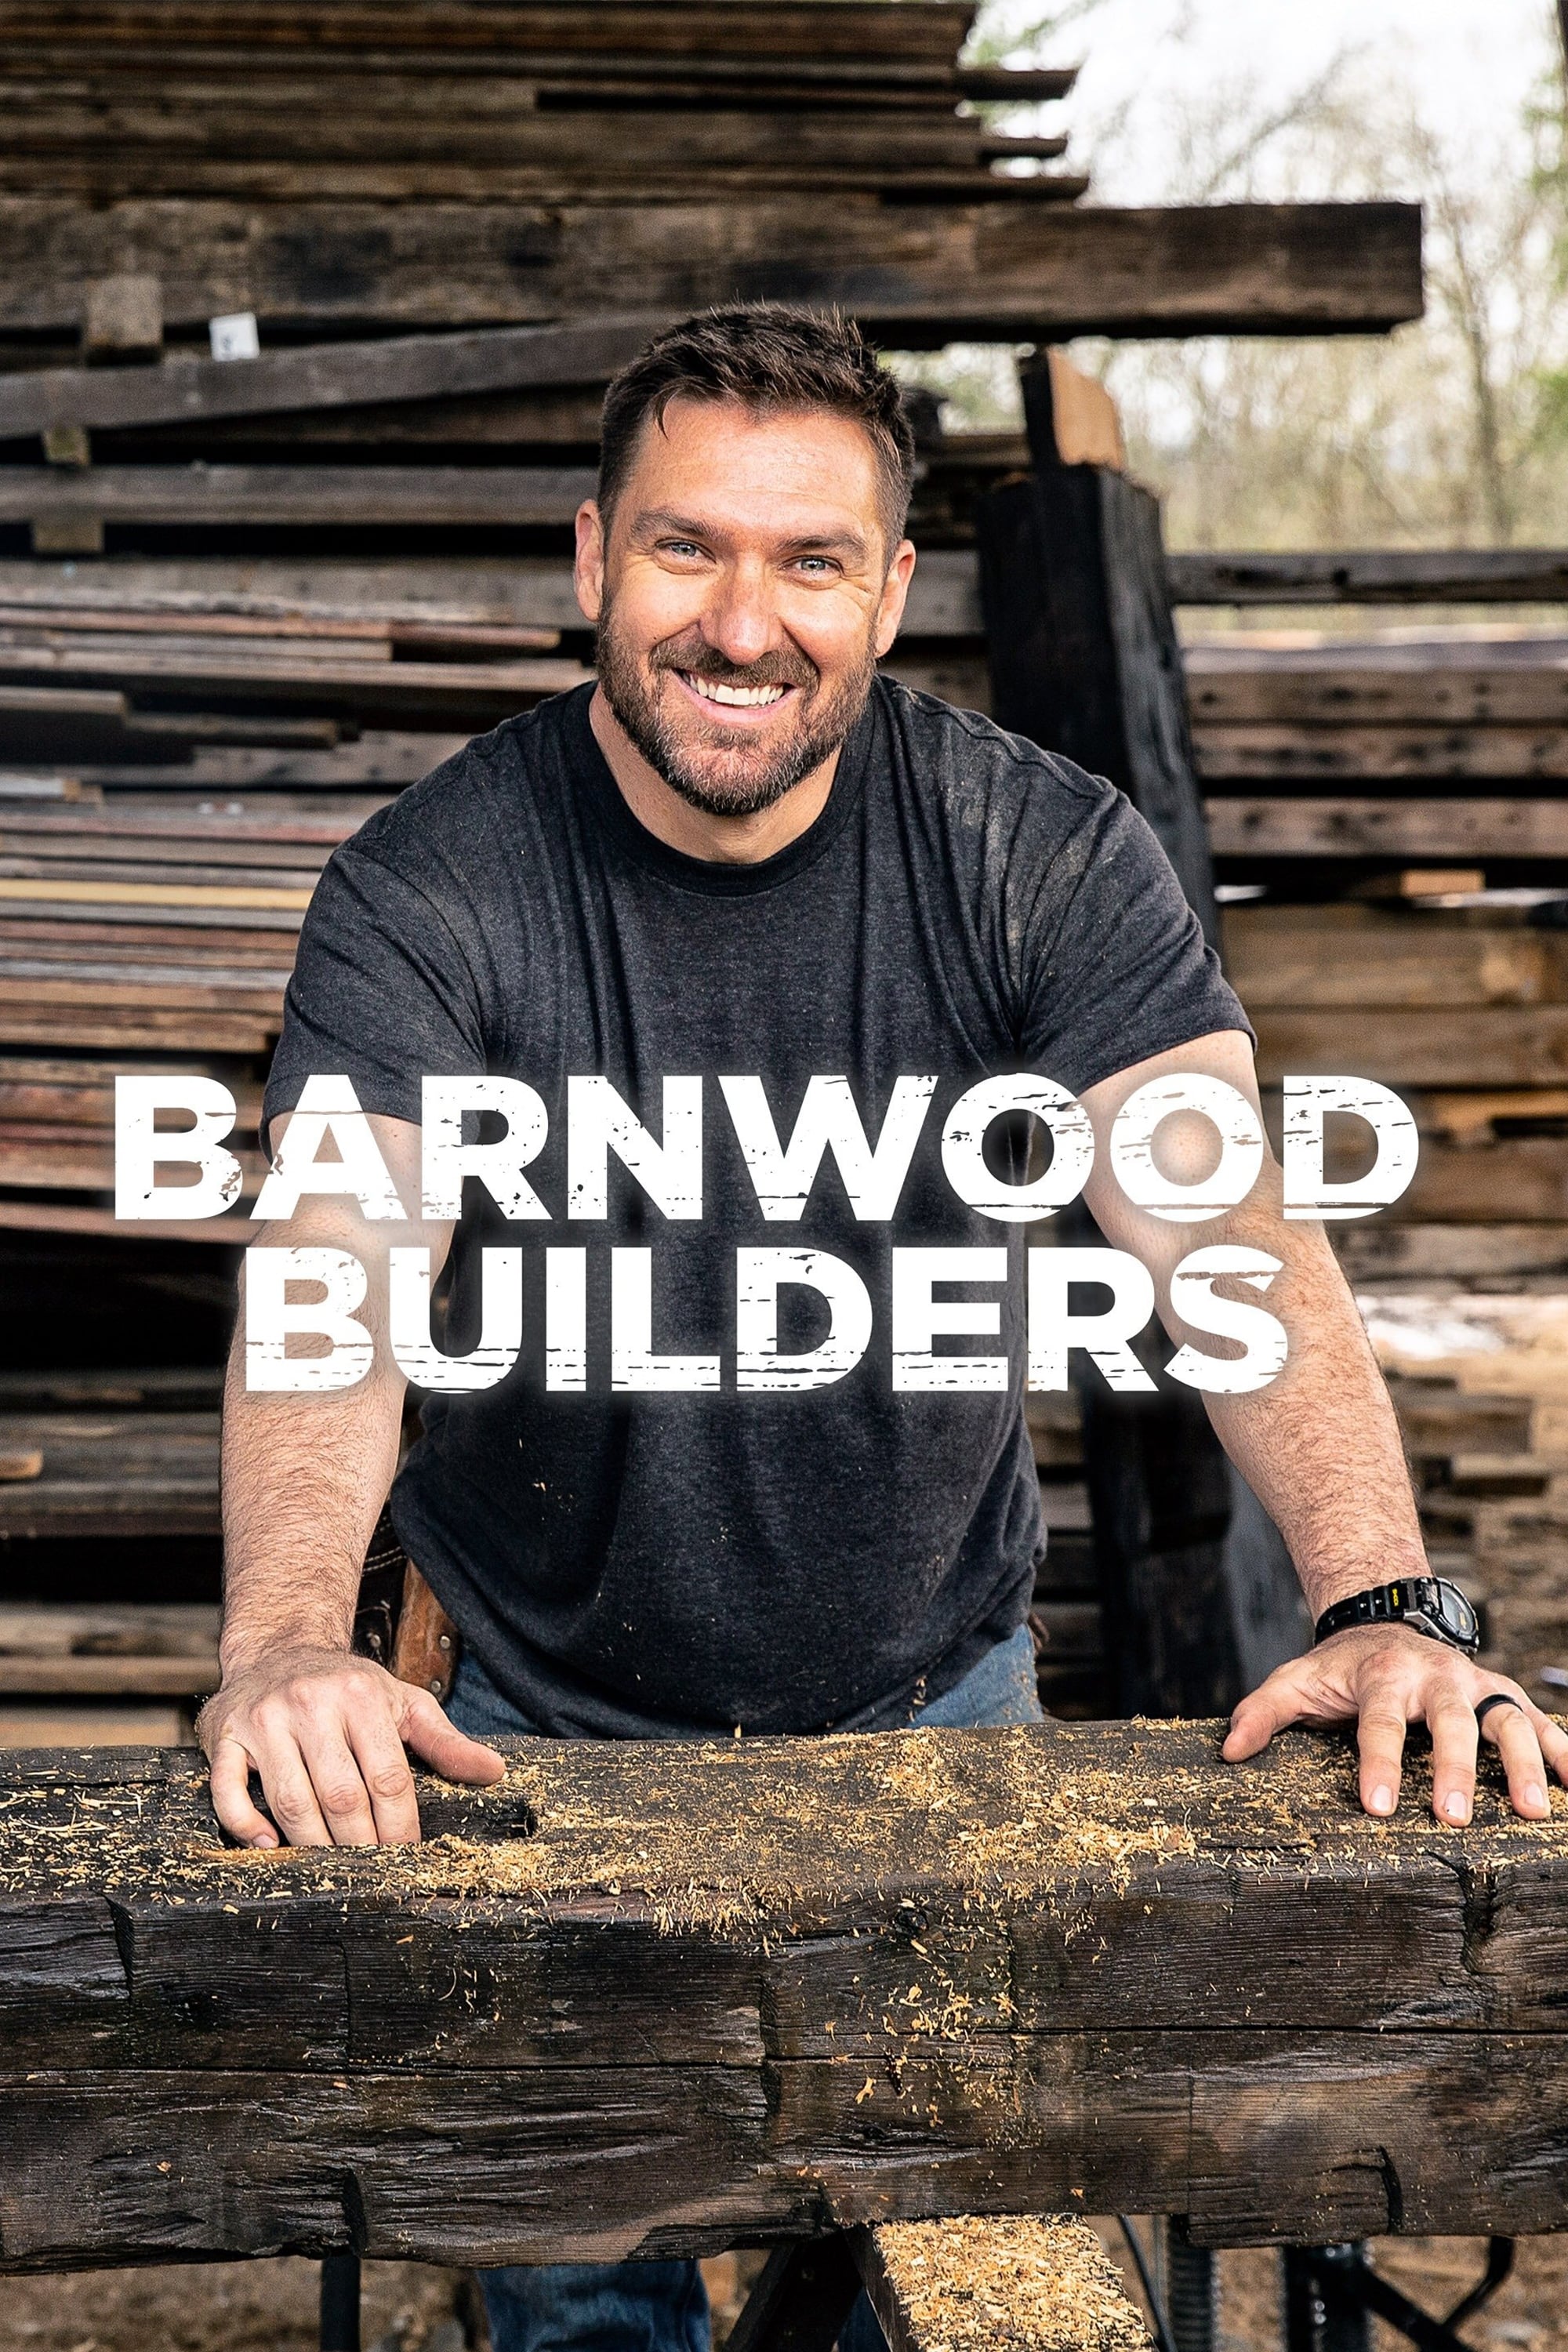 Barnwood Builders Where to Watch and Stream Online Entertainment.ie